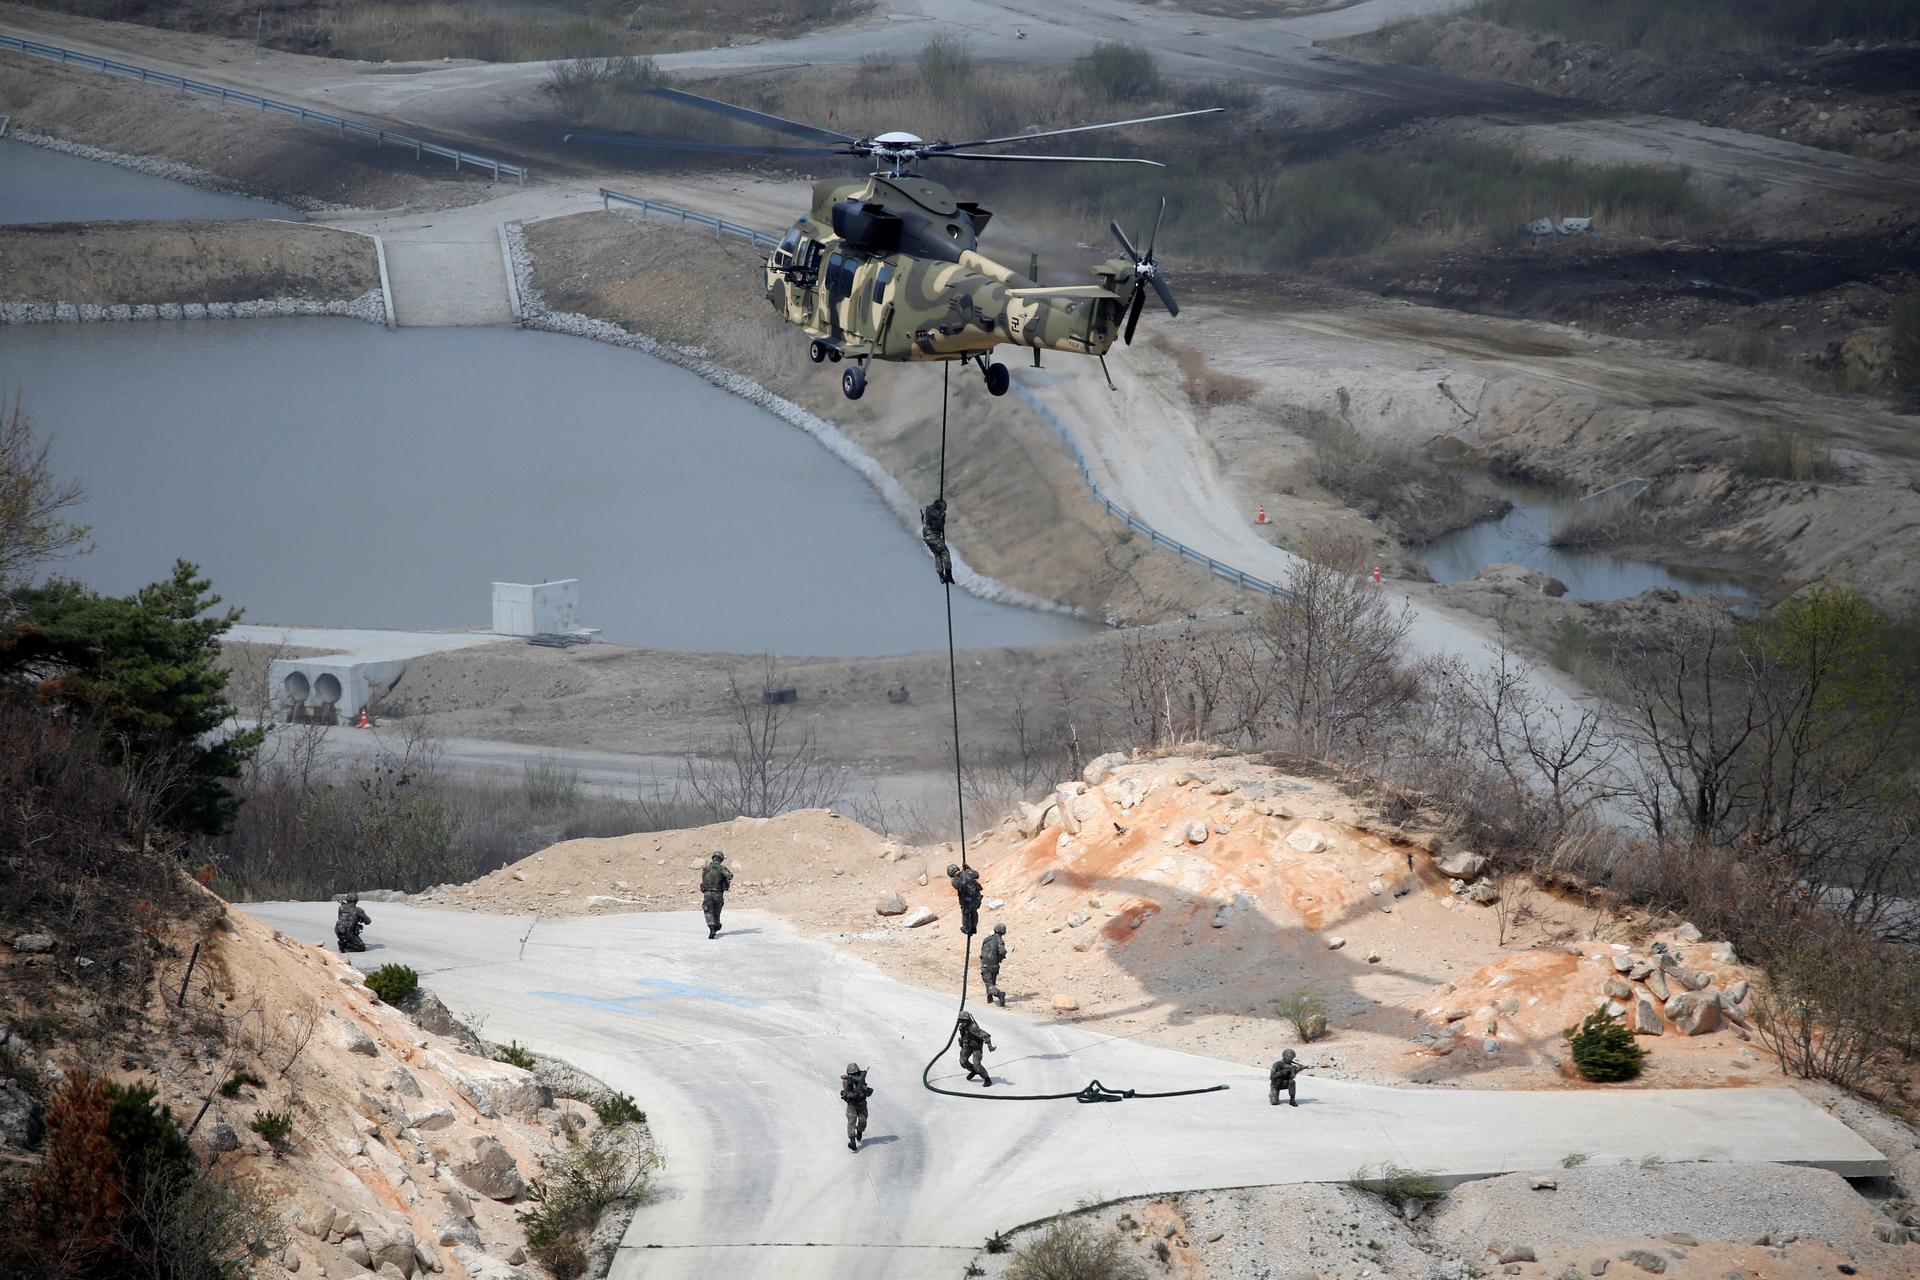 South Korean Army soldiers rappel down during a U.S.-South Korea joint live-fire military exercise, at a training field, near the demilitarized zone, separating the two Koreas in Pocheon, South Korea April 21, 2017.